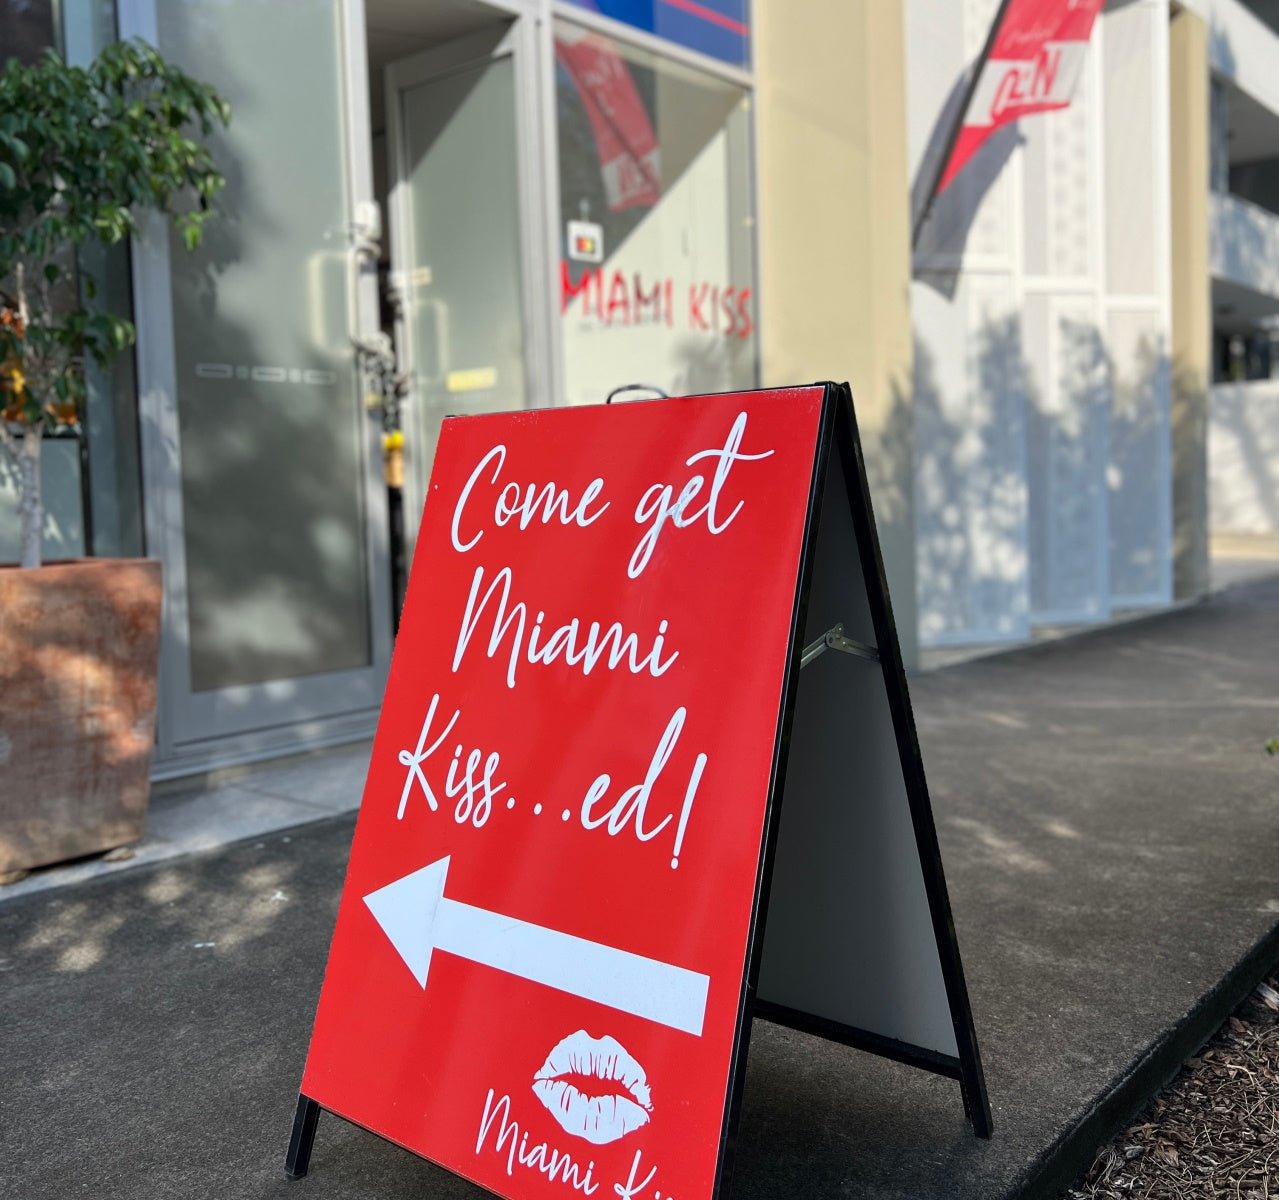 Exterior photo of Miami Kiss clinic with a-frame in foreground reading 'Come get Miami Kissed' and shopfront in background